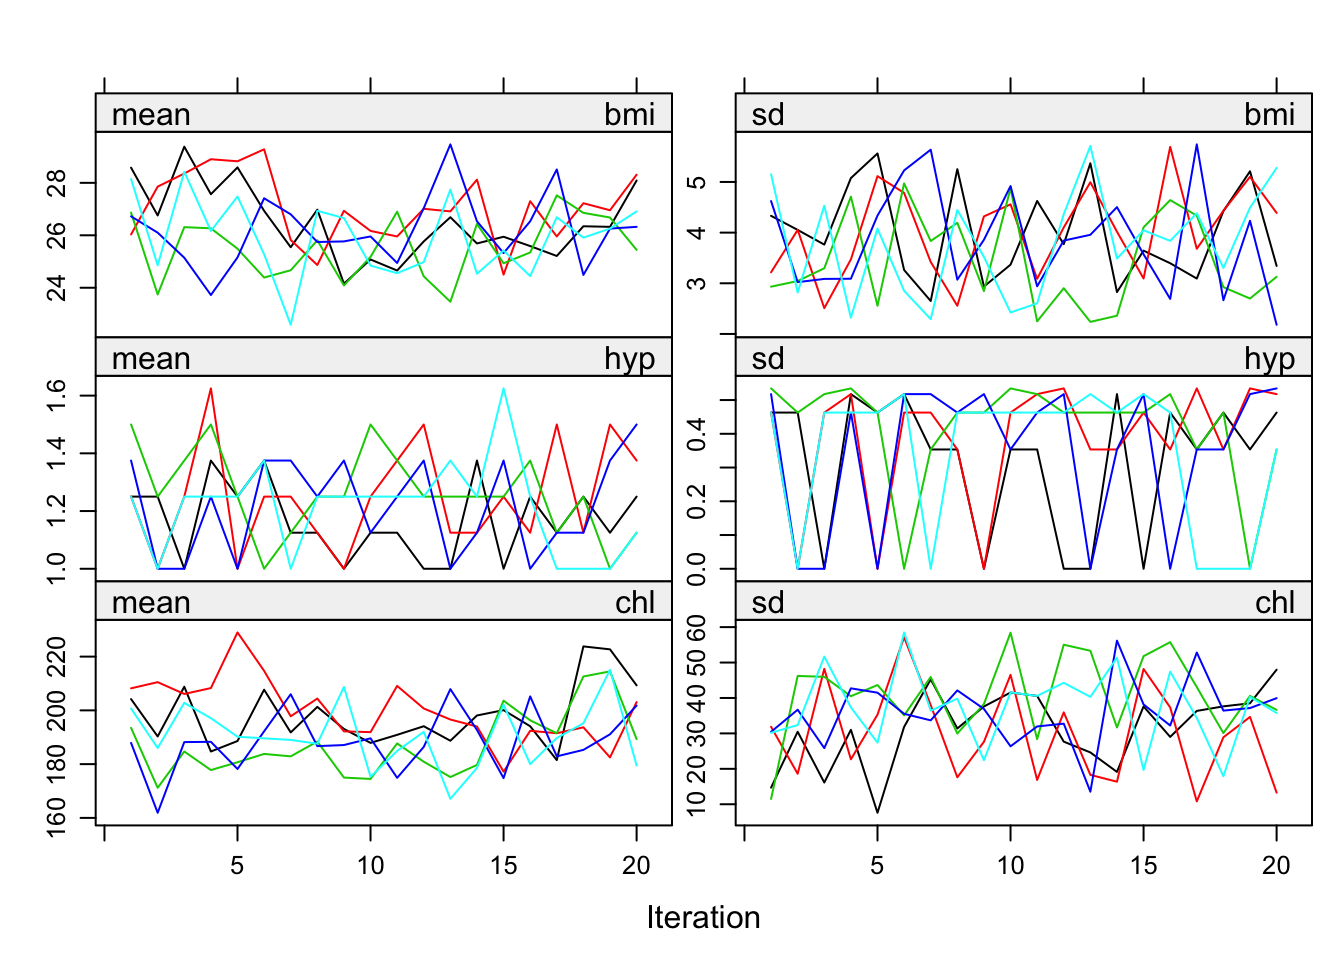 Mean and standard deviation of the synthetic values plotted against iteration number for the imputed nhanes data.